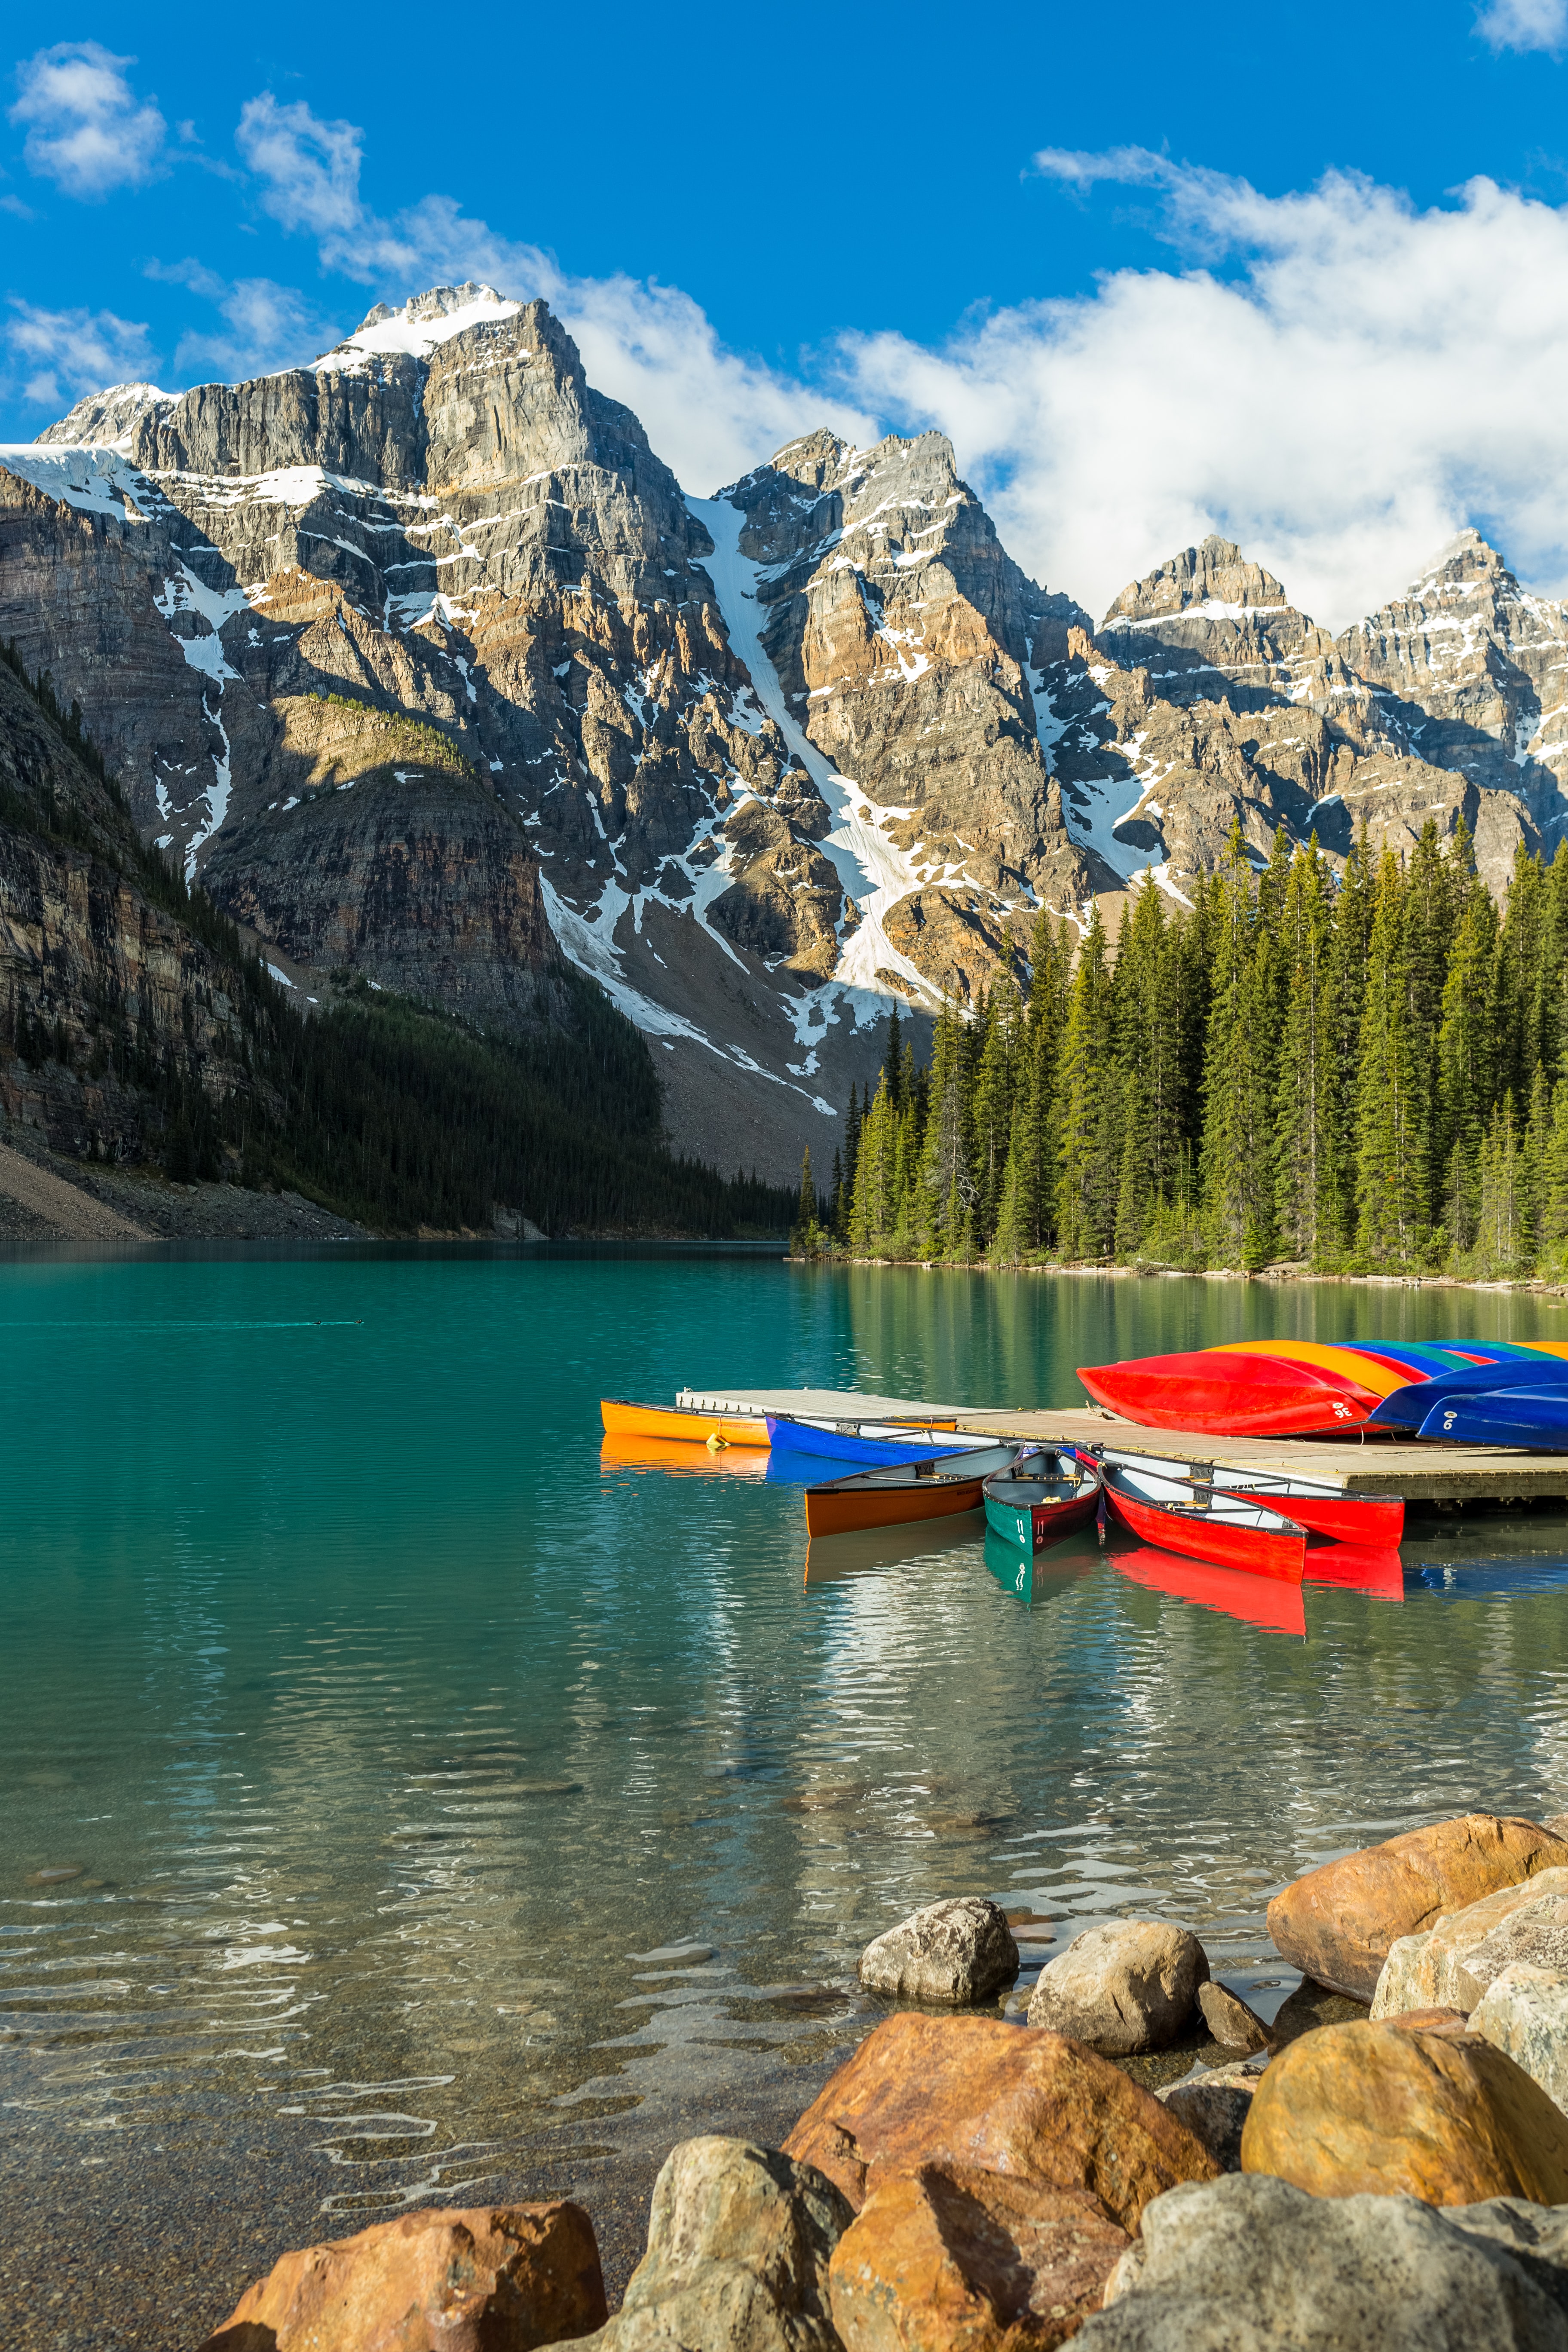 mountains, nature, boats, water, forest